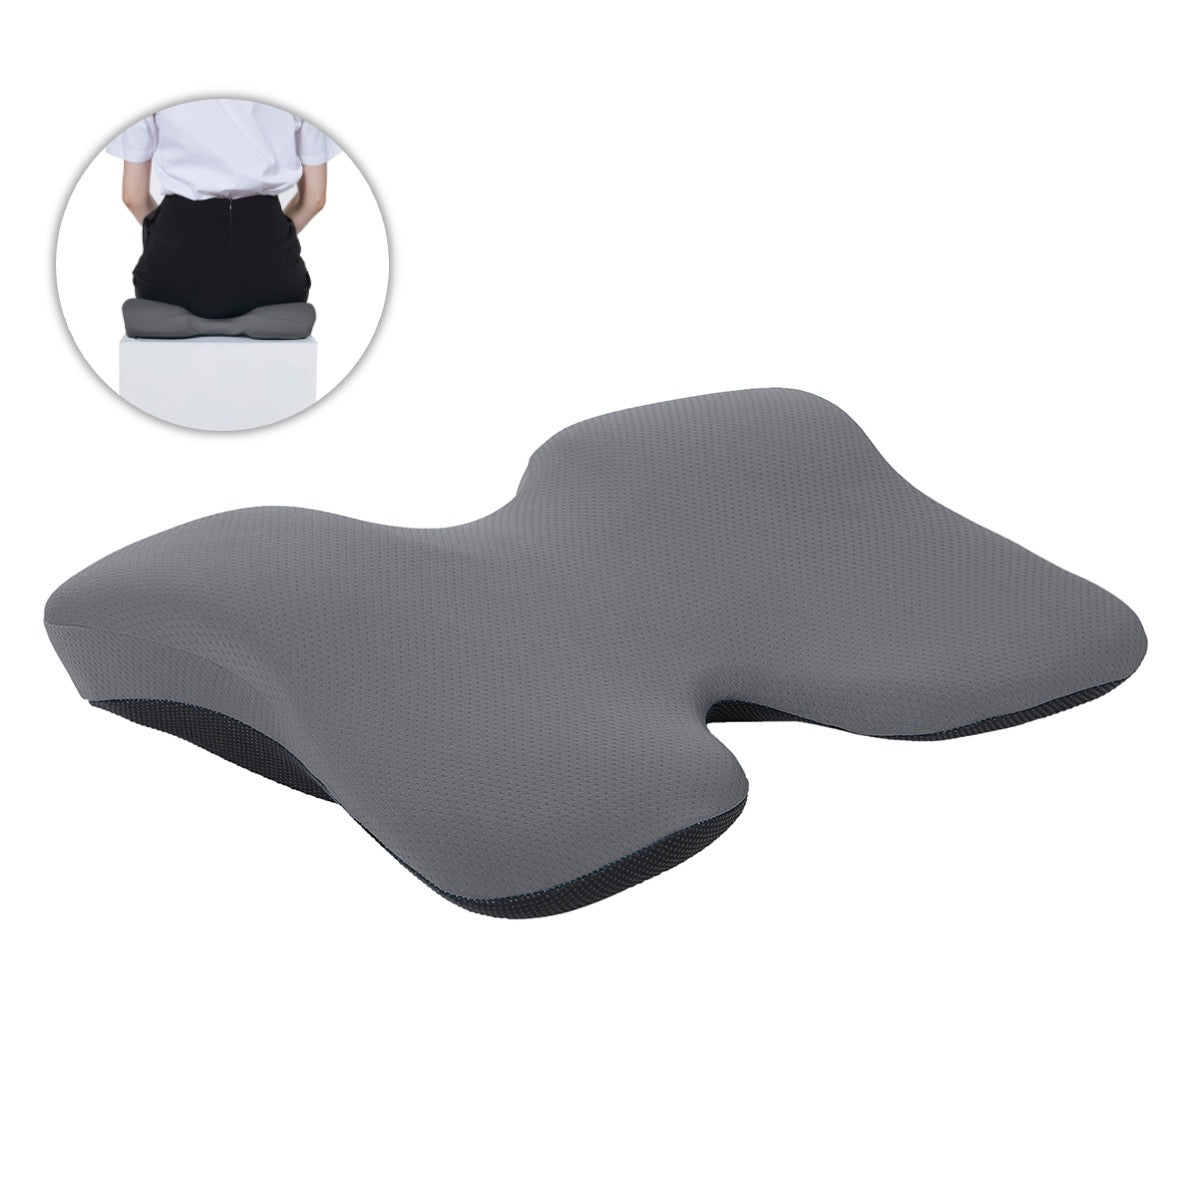 Ergoworks - EW-SCPI - Comfort Upright Back Rest Seat Cushion